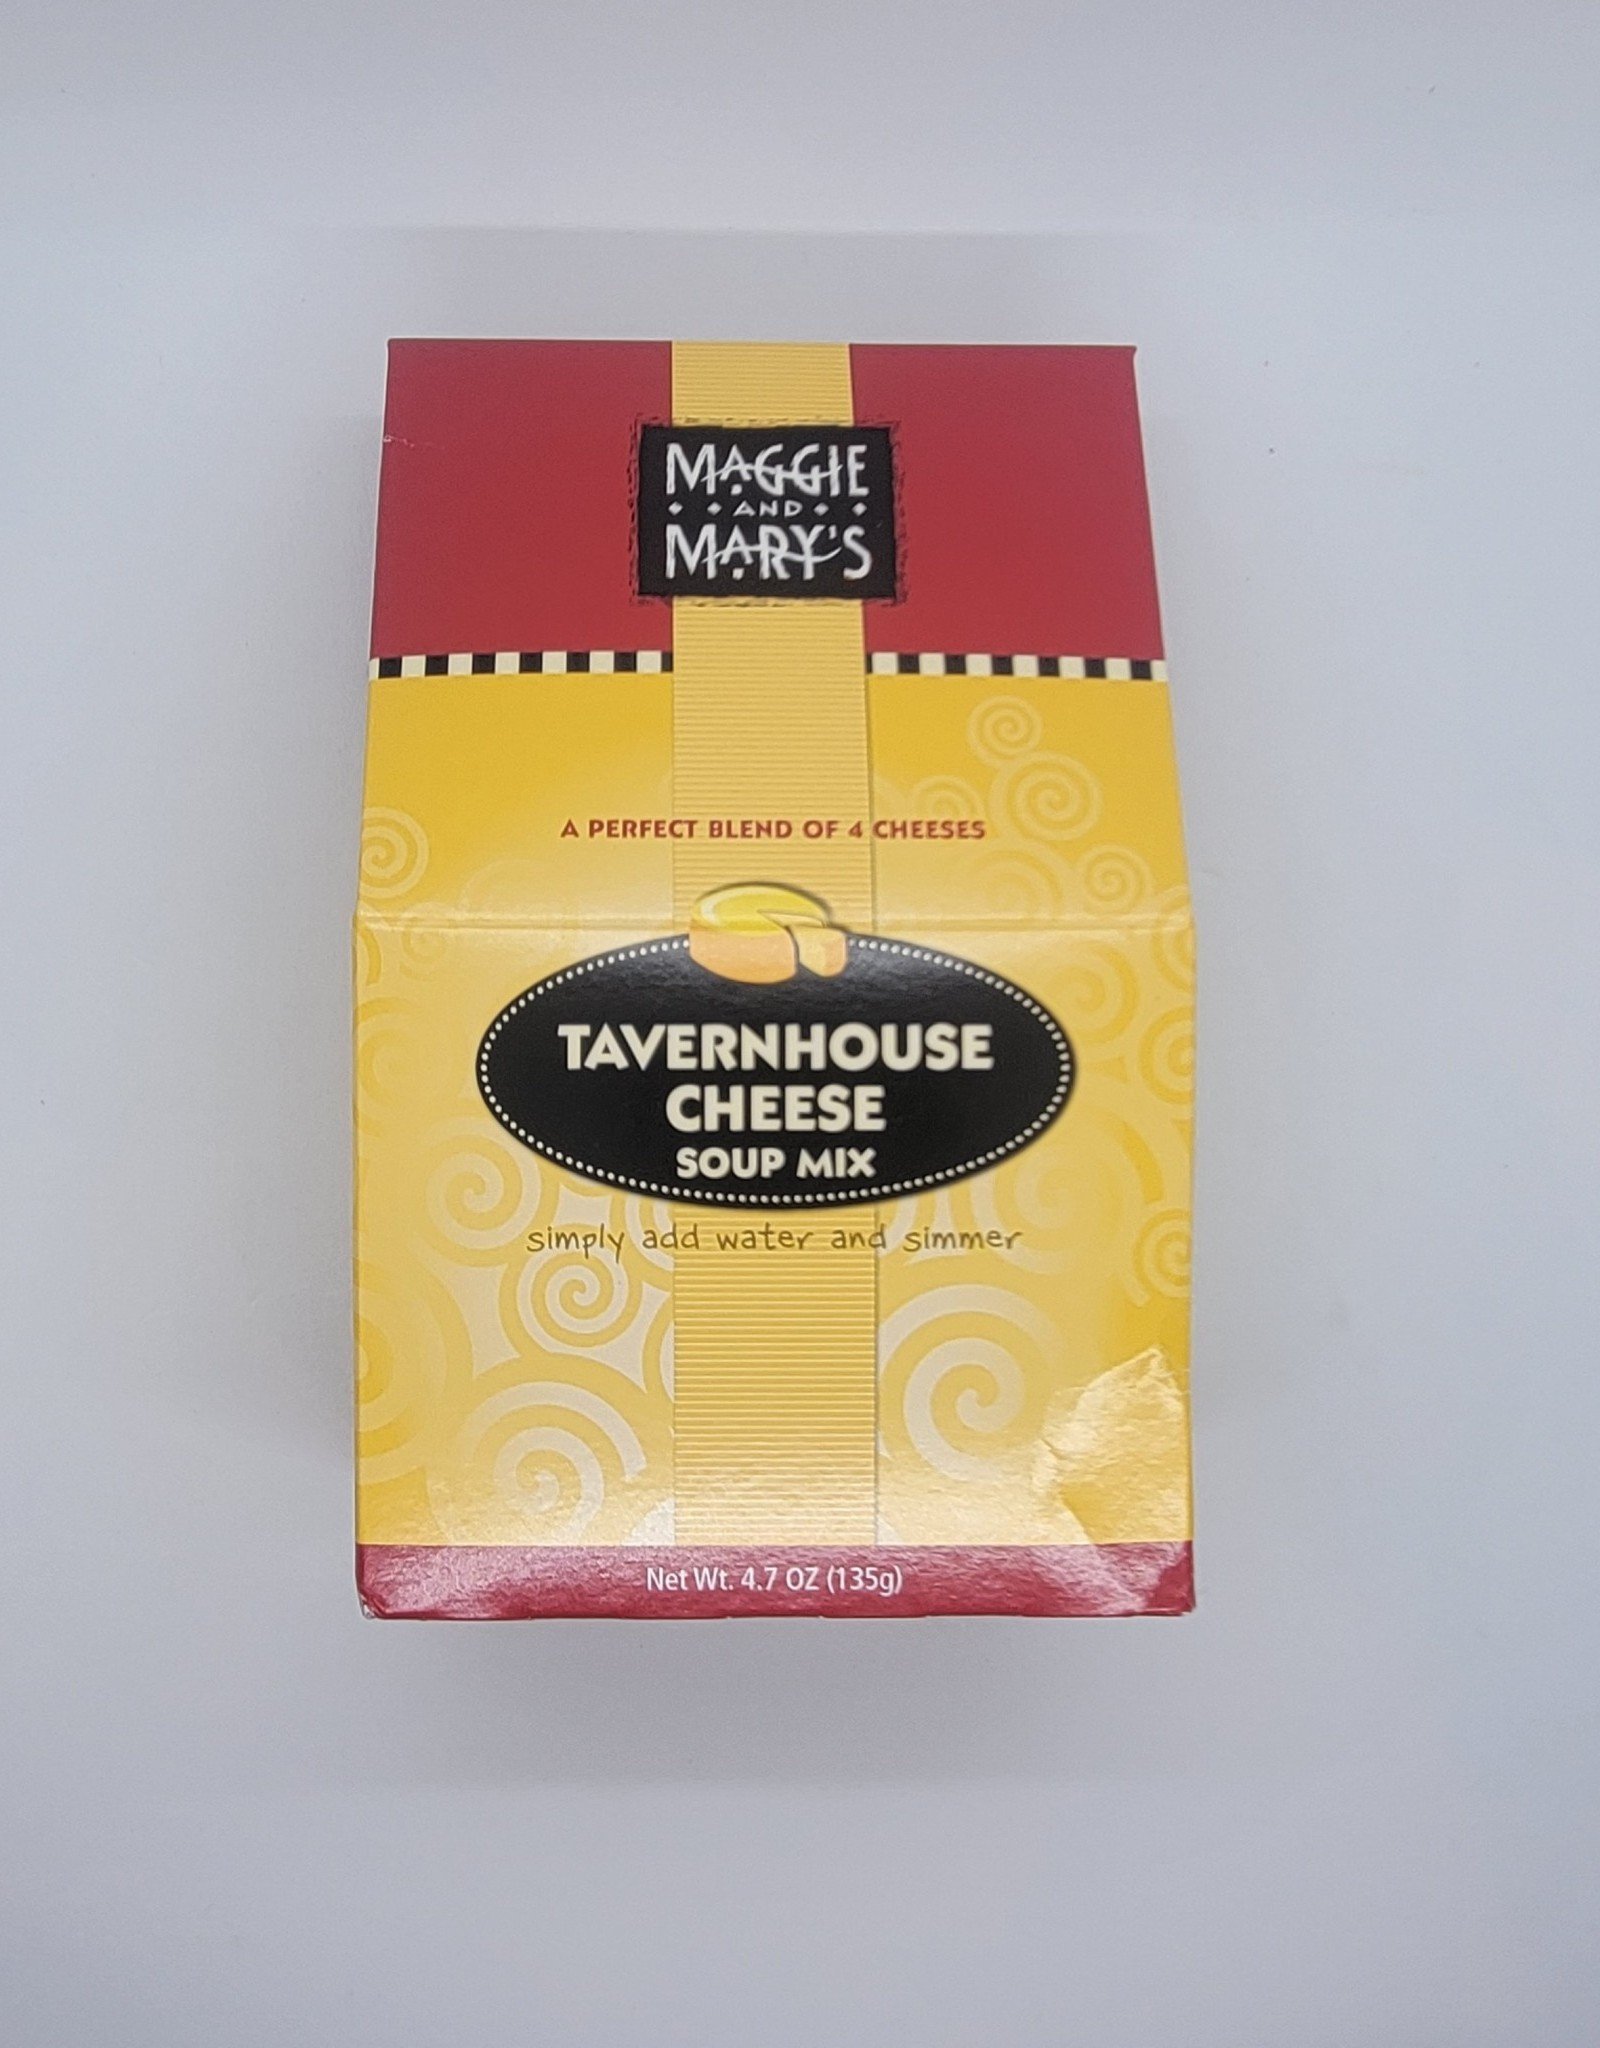 Maggie & Mary's Tavernhouse Cheese Soup Mix